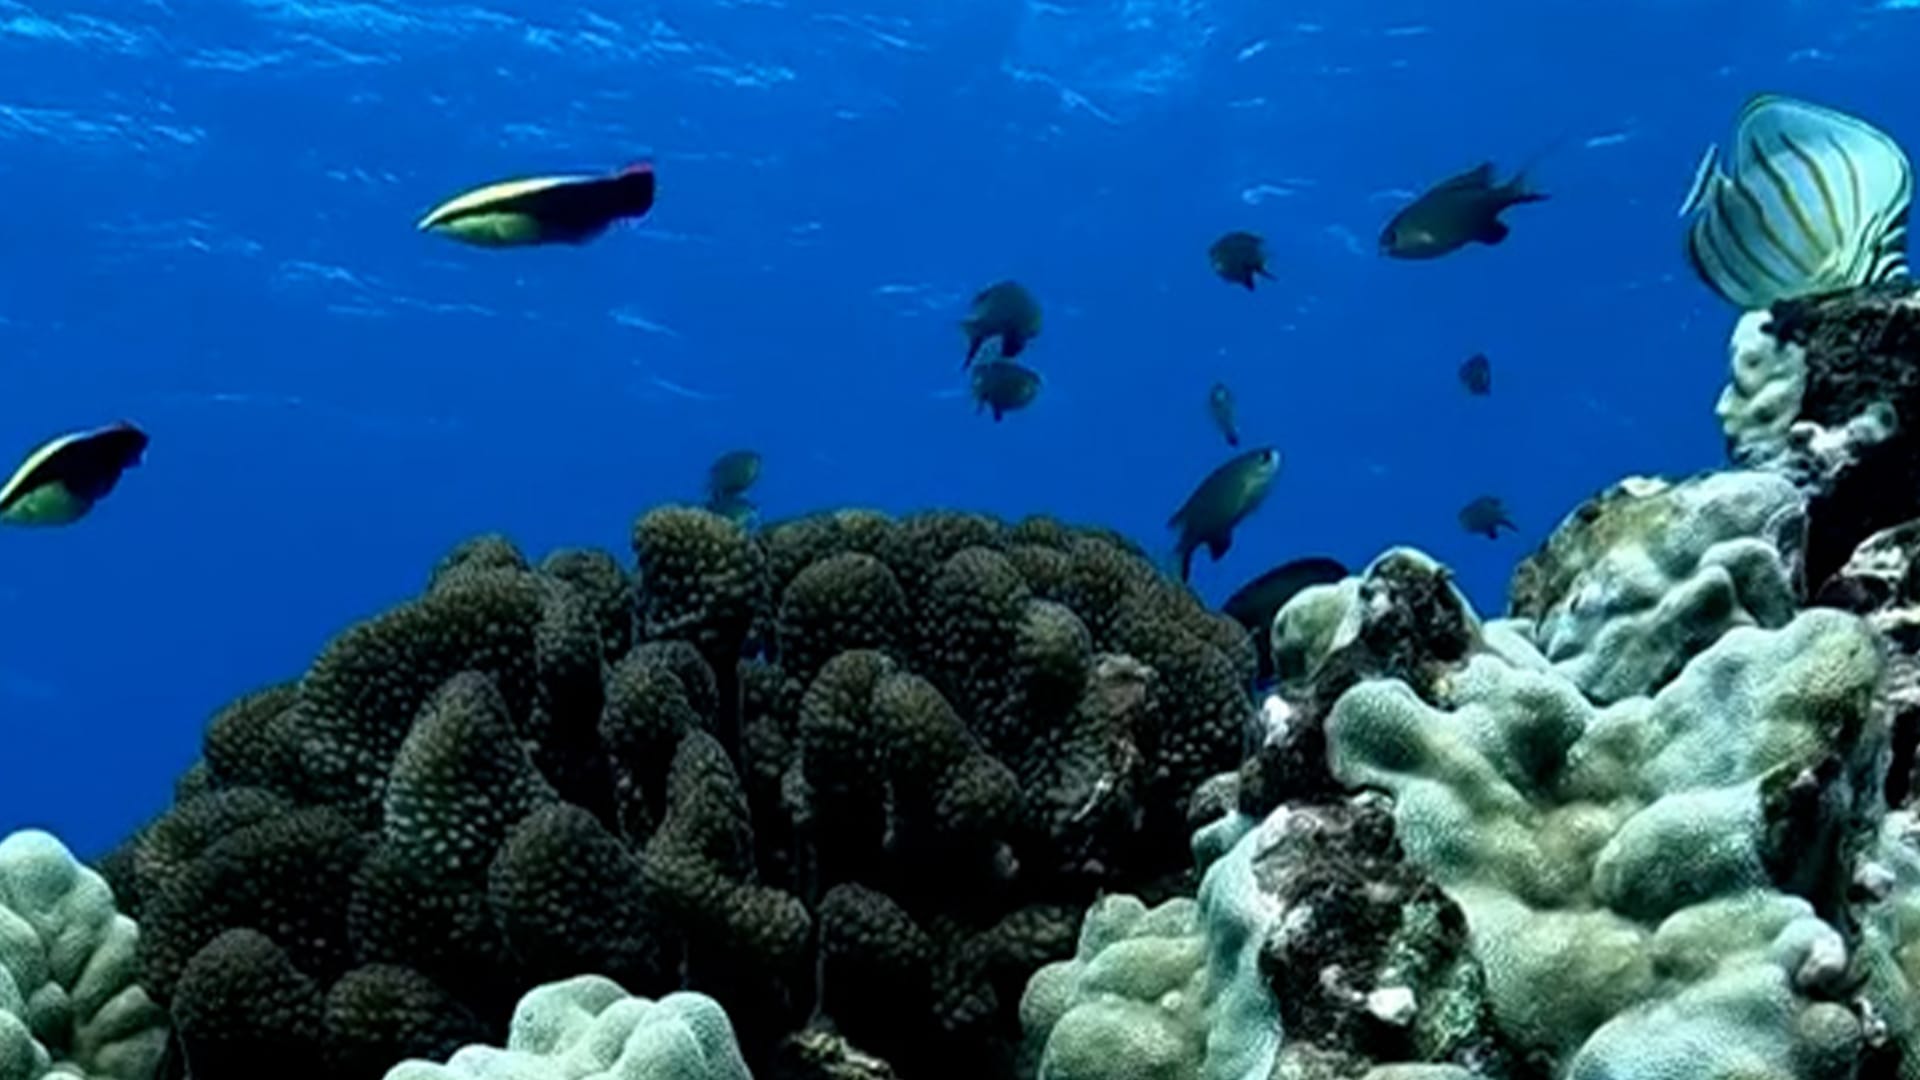 You have 20/20 vision if you can spot the eel hiding in the coral in 12 seconds